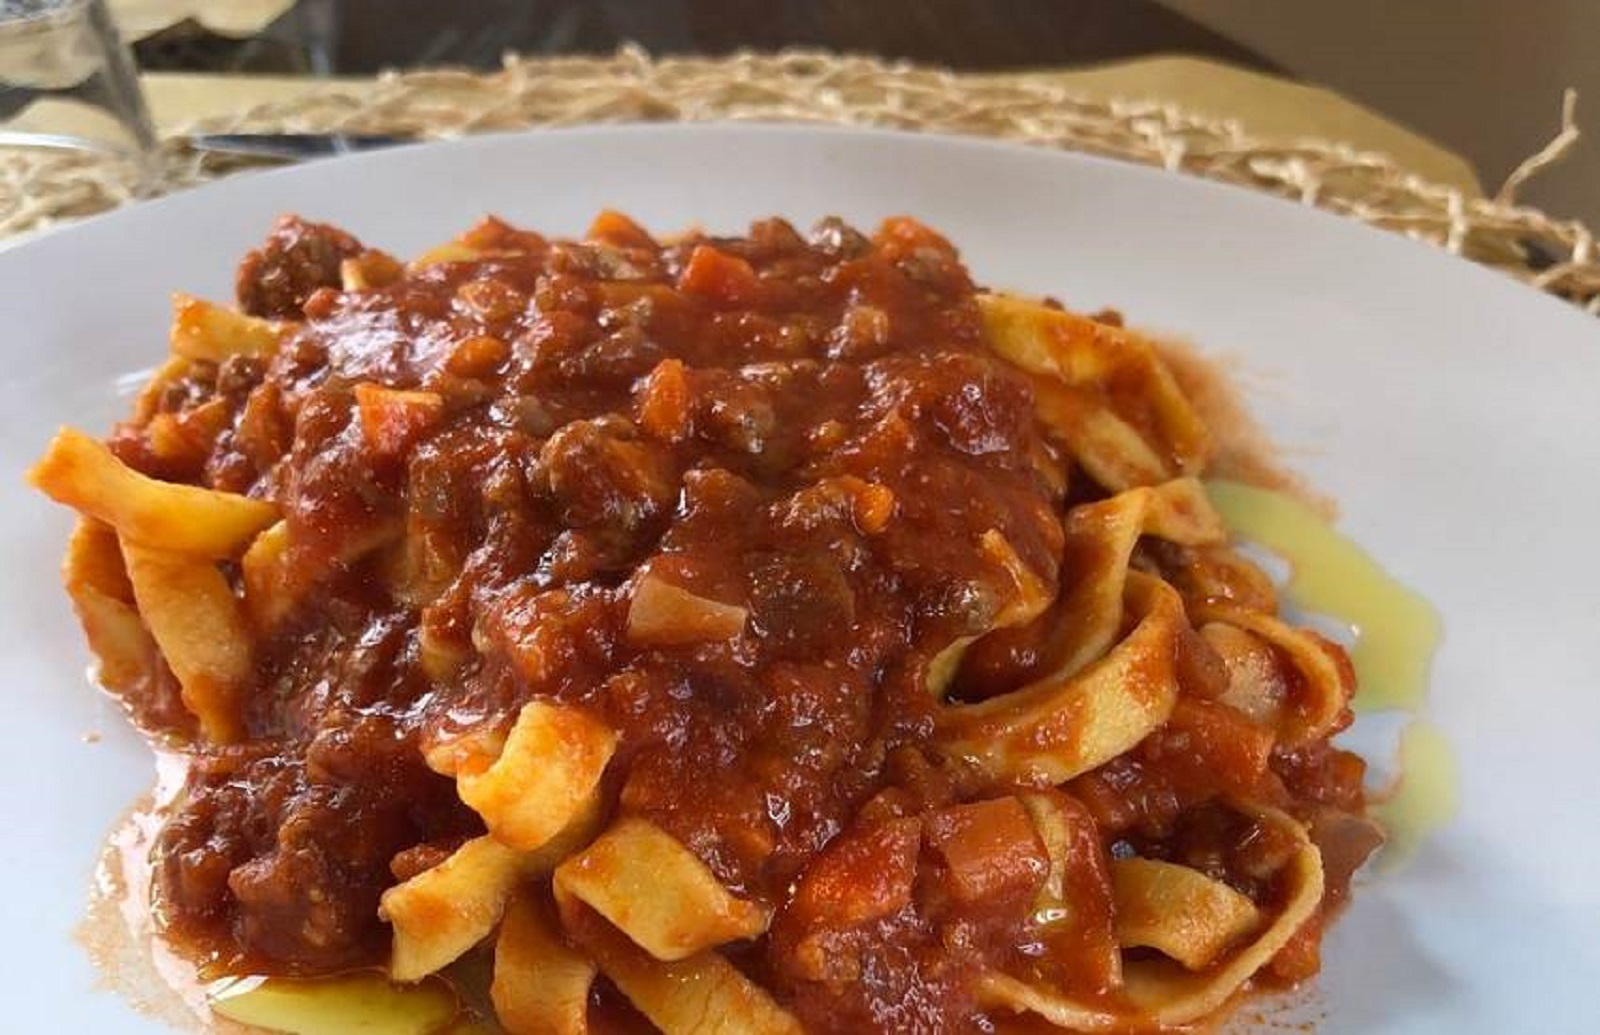 Learn how to prepare fresh pasta and sauce in this cooking class in Florence